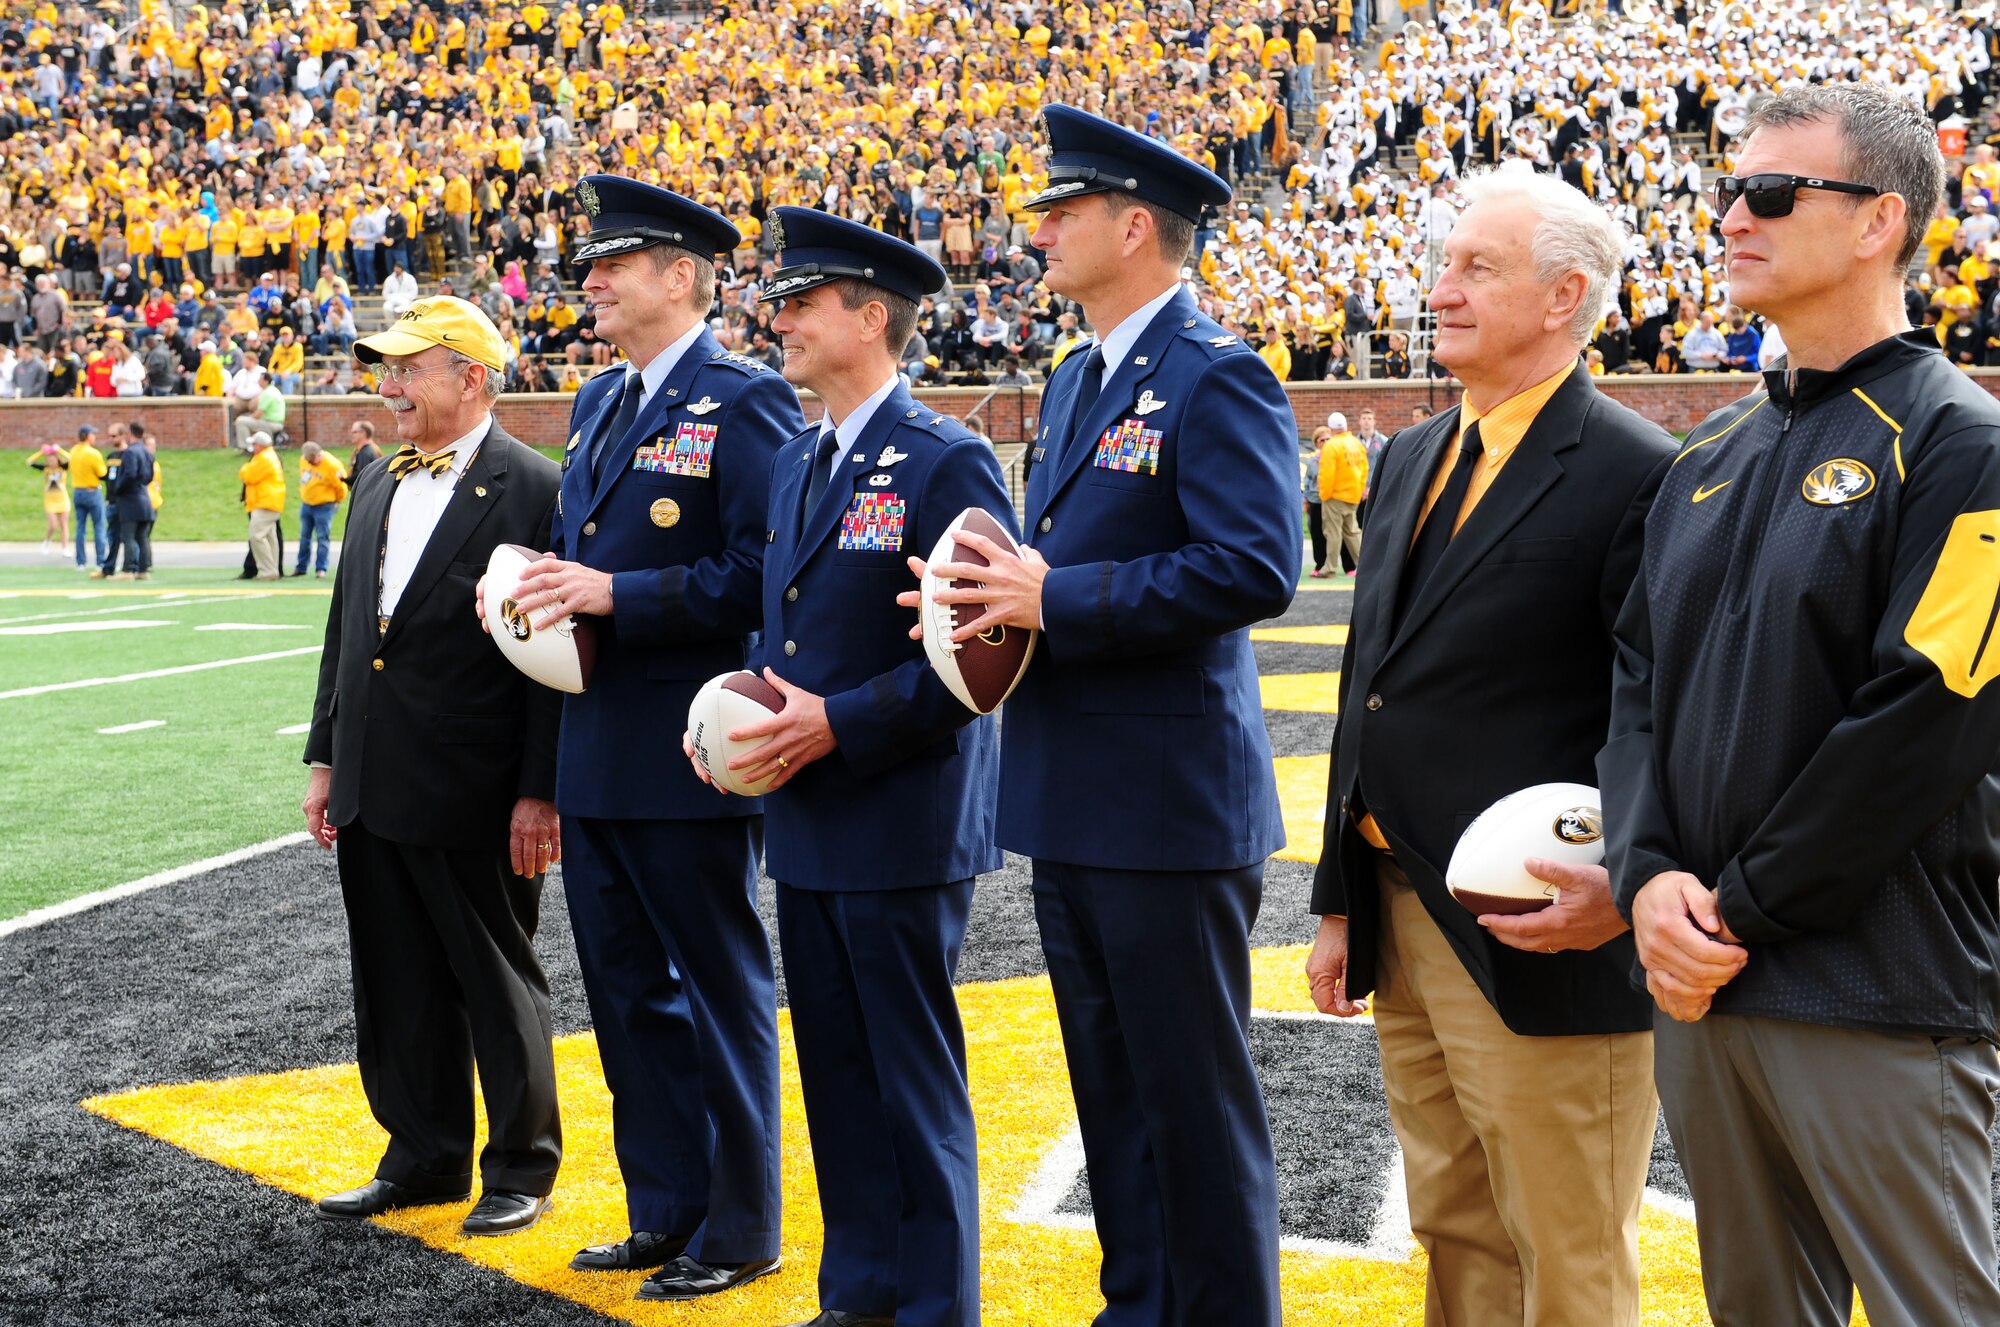 From left, R. Bowen Loftin, University of Missouri chancellor, Gen. Robin Rand, Air Force Global Strike Command commander, Brig. Gen. Paul Tibbets IV, 509th Bomb Wing commander, Col. Michael Francis, 131st Bomb Wing commander, Joe Scallorns, AFGSC civic leader, and Mack Rhoades, University of Missouri director of athletics, stand on the end zone at Faurot Field Oct. 3, 2015, in Columbia, Mo. Each commander and Scallorns received a commemorative football from Rhoades, as part of Mizzou’s military appreciation game. (U.S. Air Force photo by Airman 1st Class Jazmin Smith/Released)